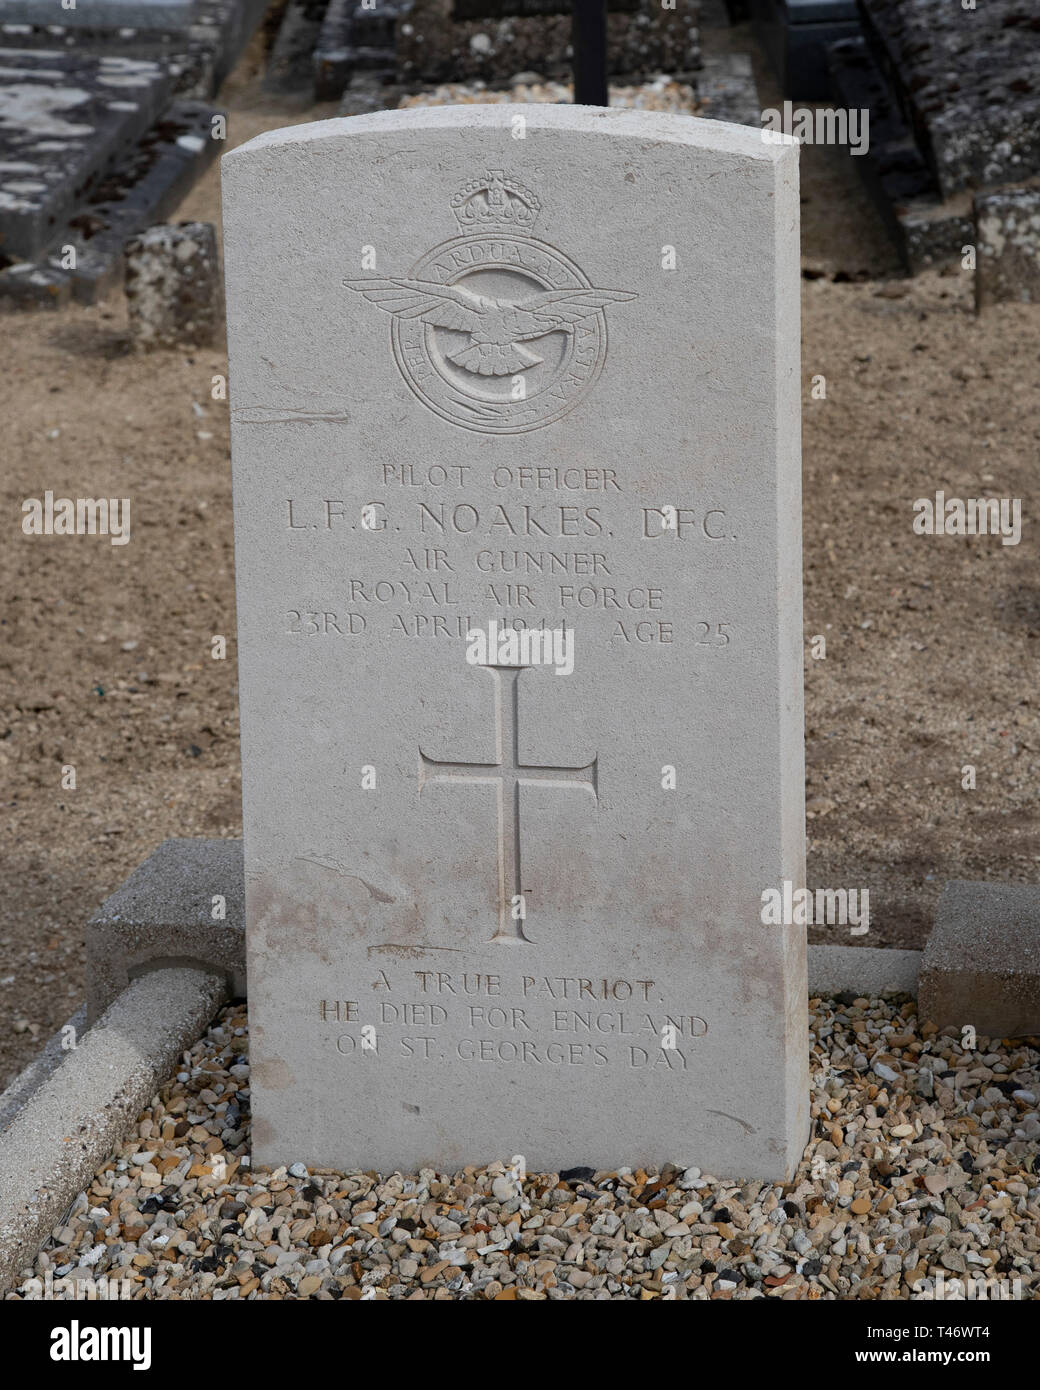 Grave of L F G Noakes RAF bomber crew in Maizy churchyard, France Stock Photo